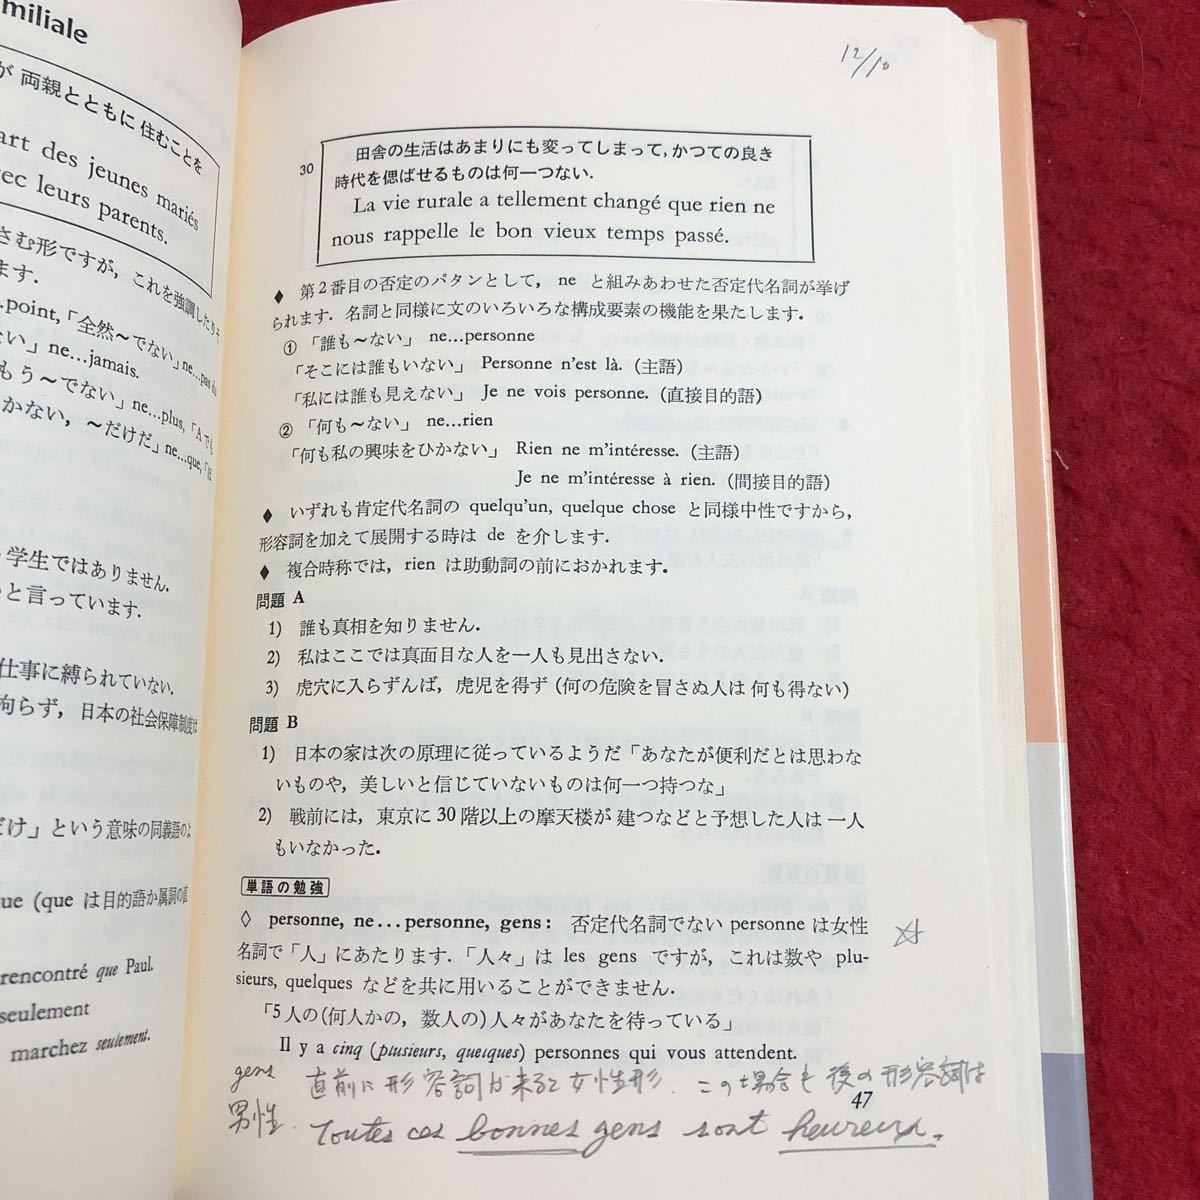 M6e-033 standard French course 3 composition author Fukui . man etc. 1992 year 9 month 10 day 18 version issue large . pavilion bookstore French teaching material grammar single language table reality life 